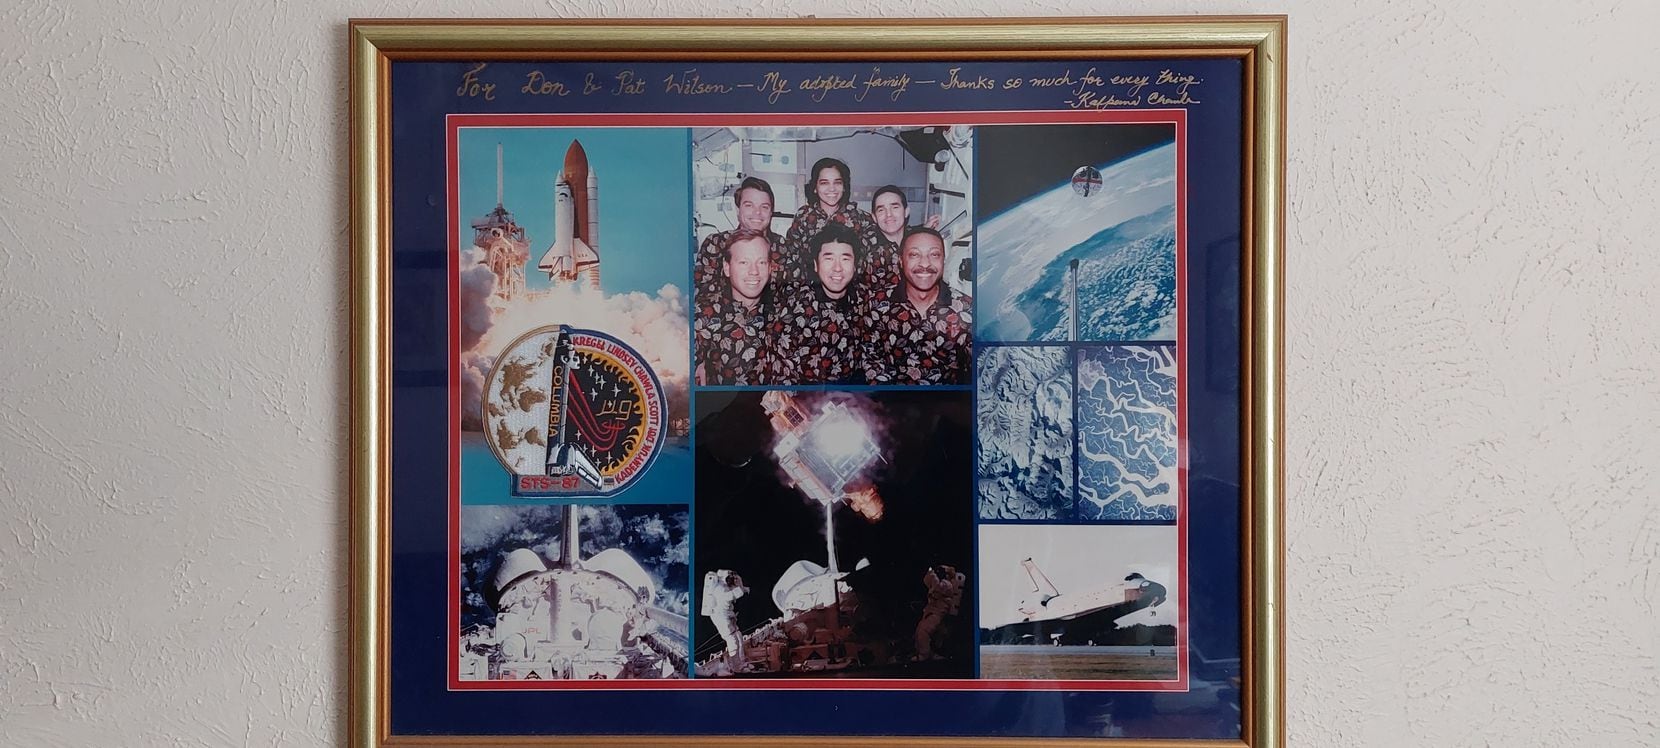 Kalpana Chawla gave this plaque to her teacher and mentor, Don Wilson. The inscription in...